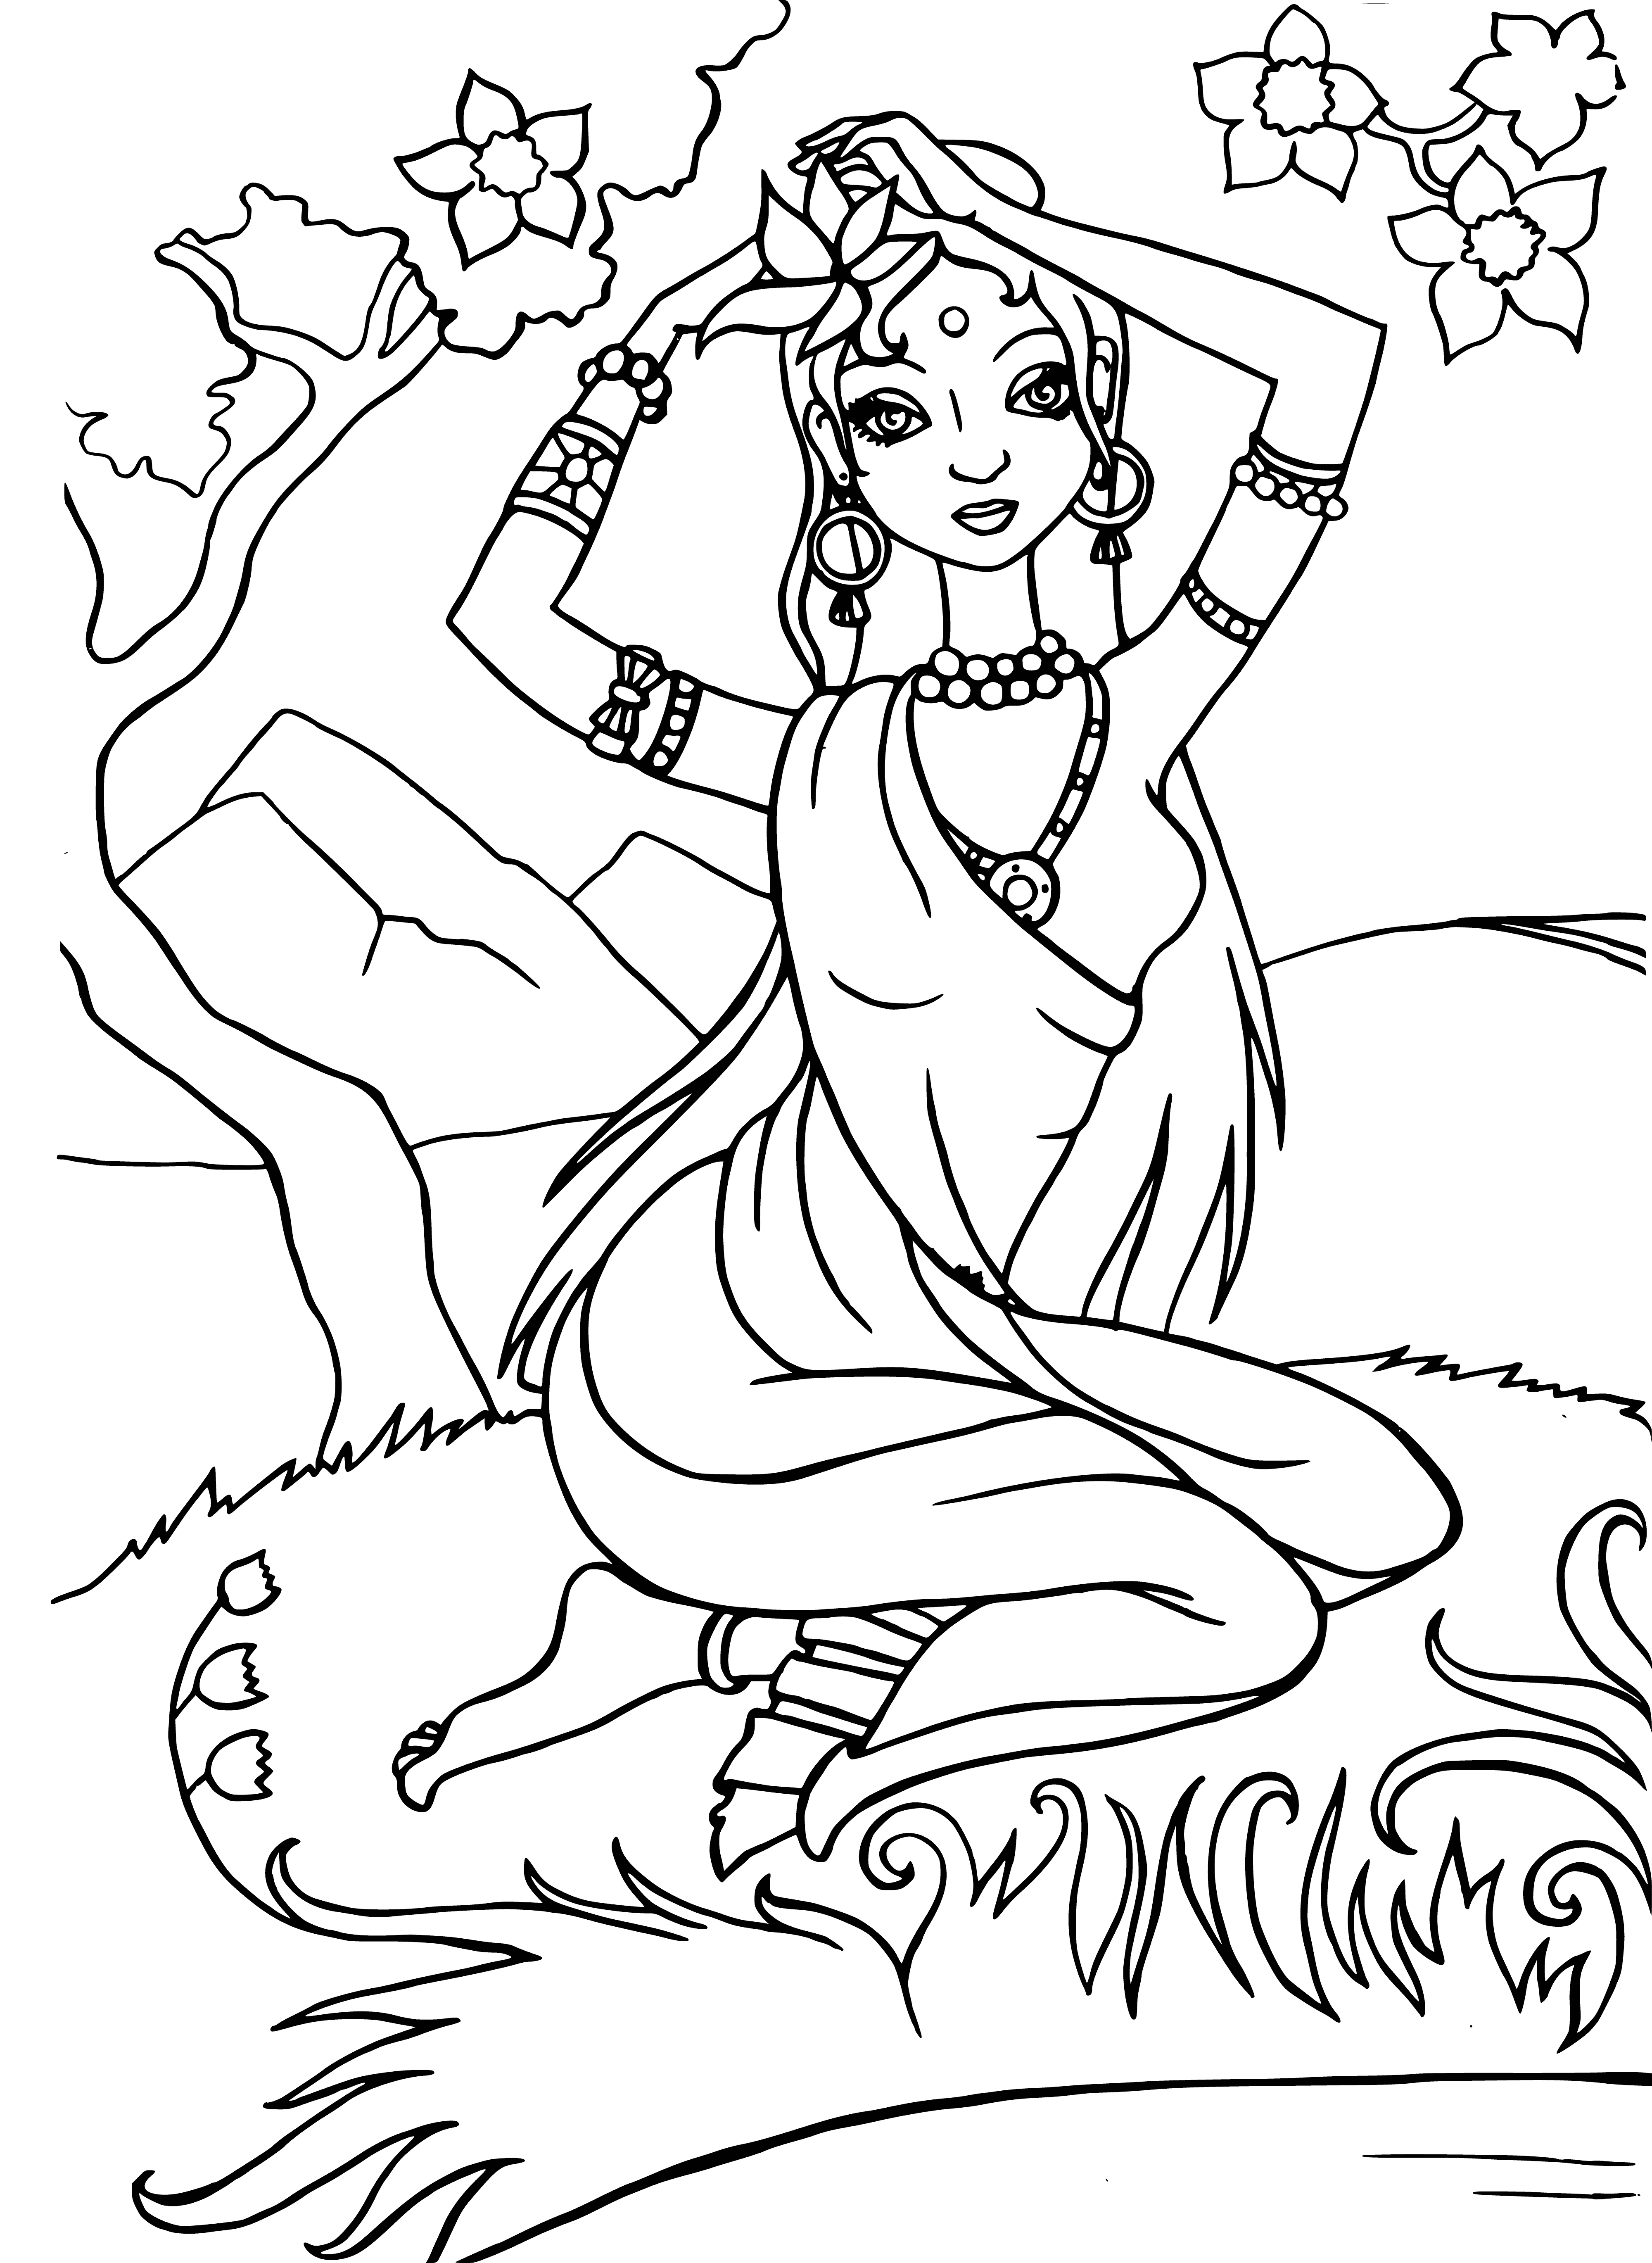 coloring page: Coloring page of a princess in a beautiful palace surrounded by a forest, a river and pink/purple flowers. Fairy friends accompany her as she wears a pink dress and has long blonde hair.